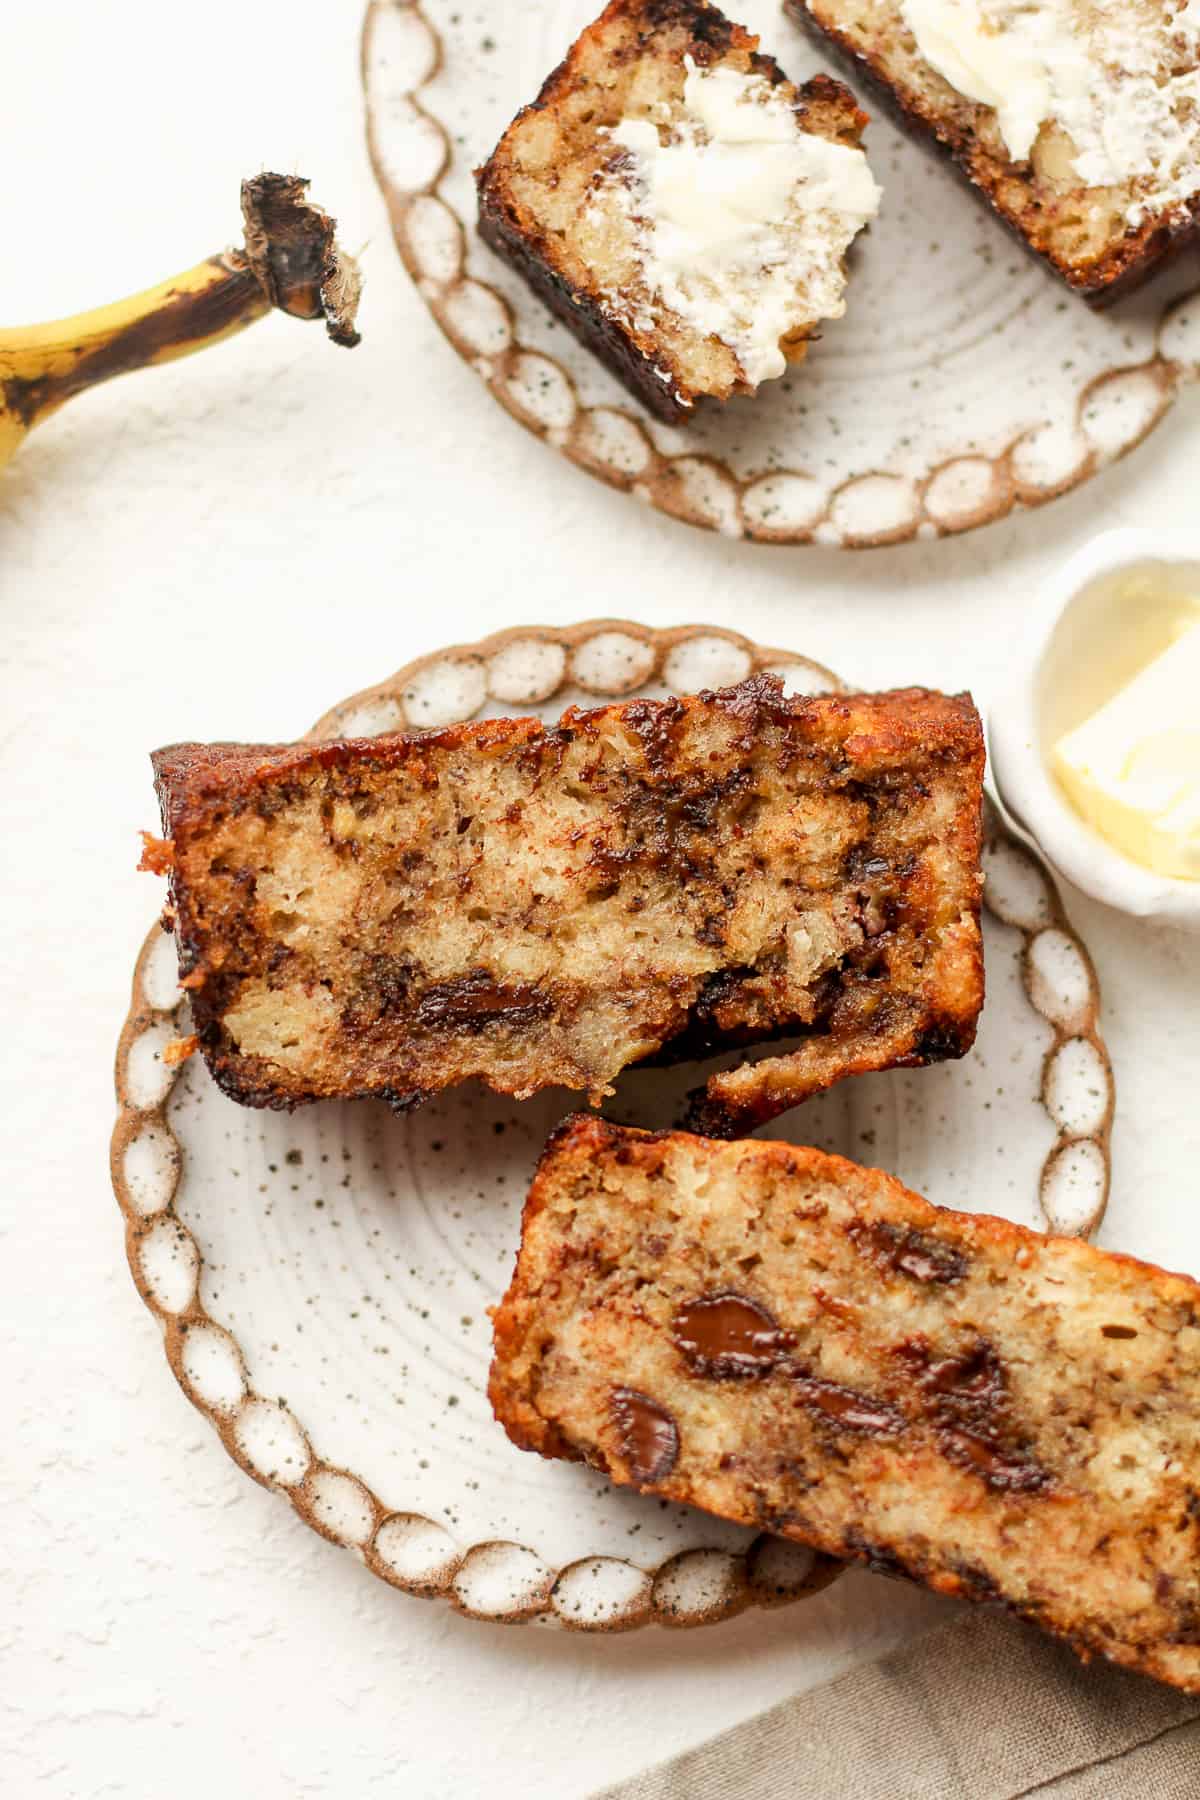 Two plates of the best banana bread, one with chocolate chips.